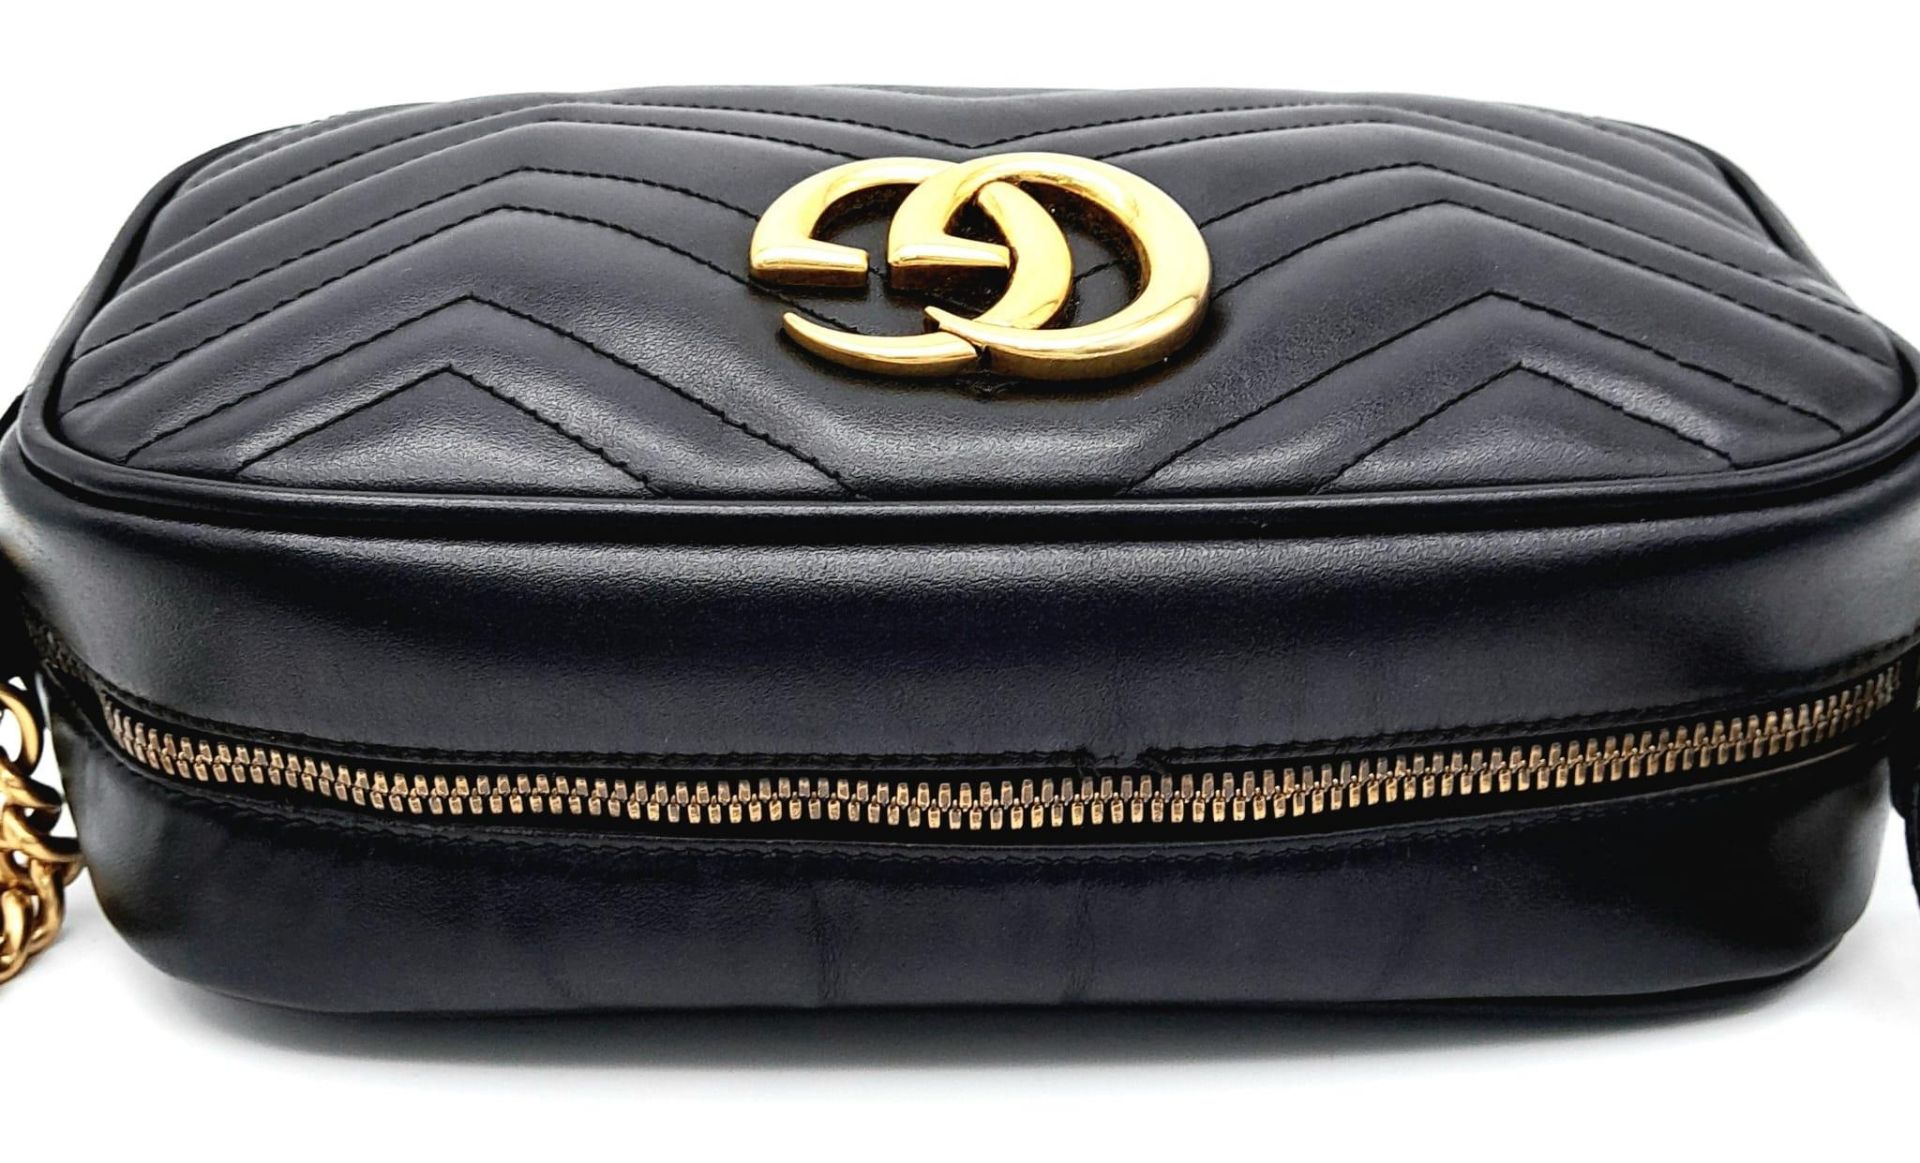 A Gucci Marmont Quilted Leather Cross-Body bag. Adjustable shoulder strap. Gold-tone Hardware. Beige - Image 6 of 12